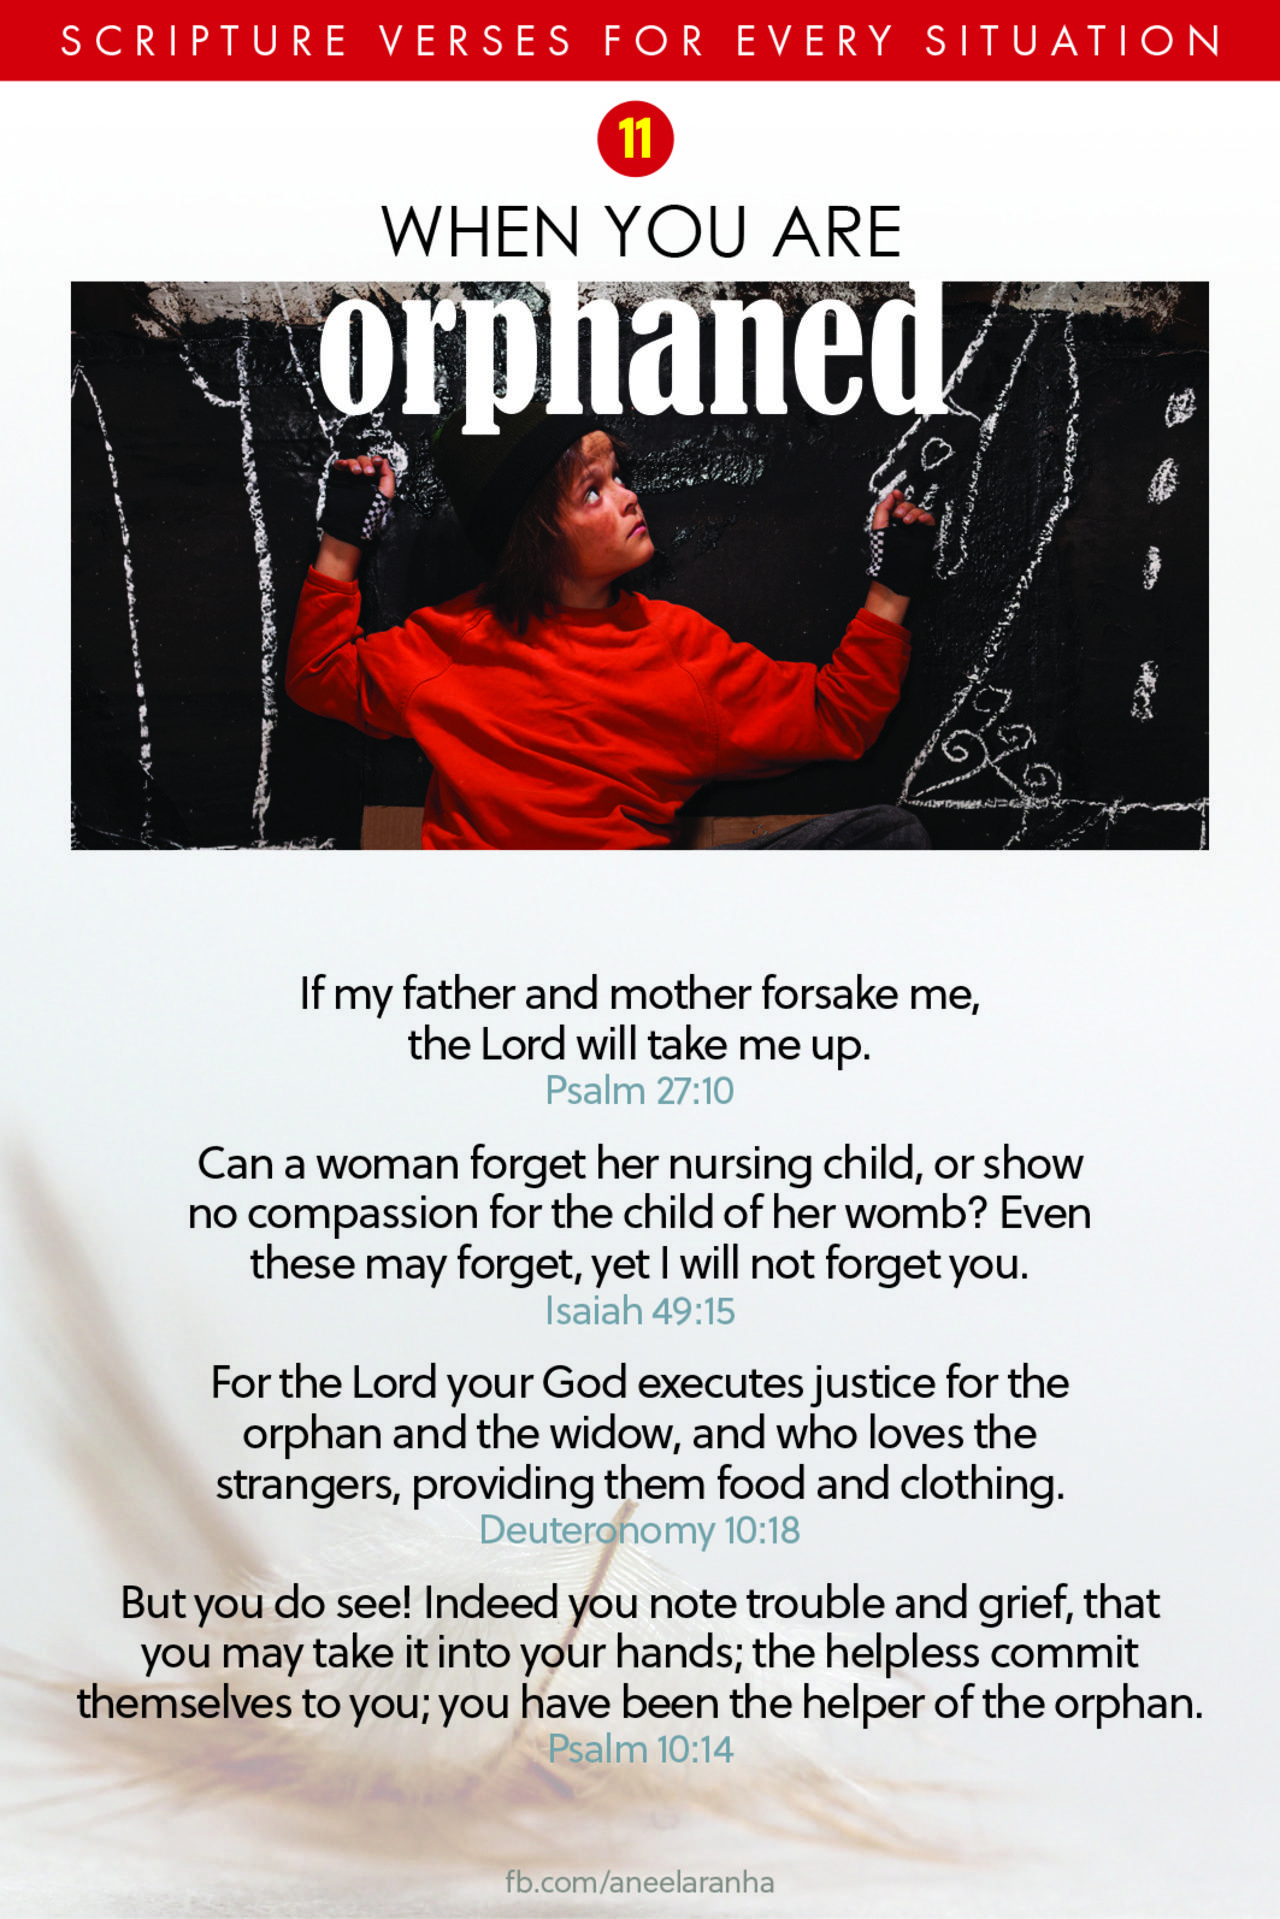 11. Are you orphaned?